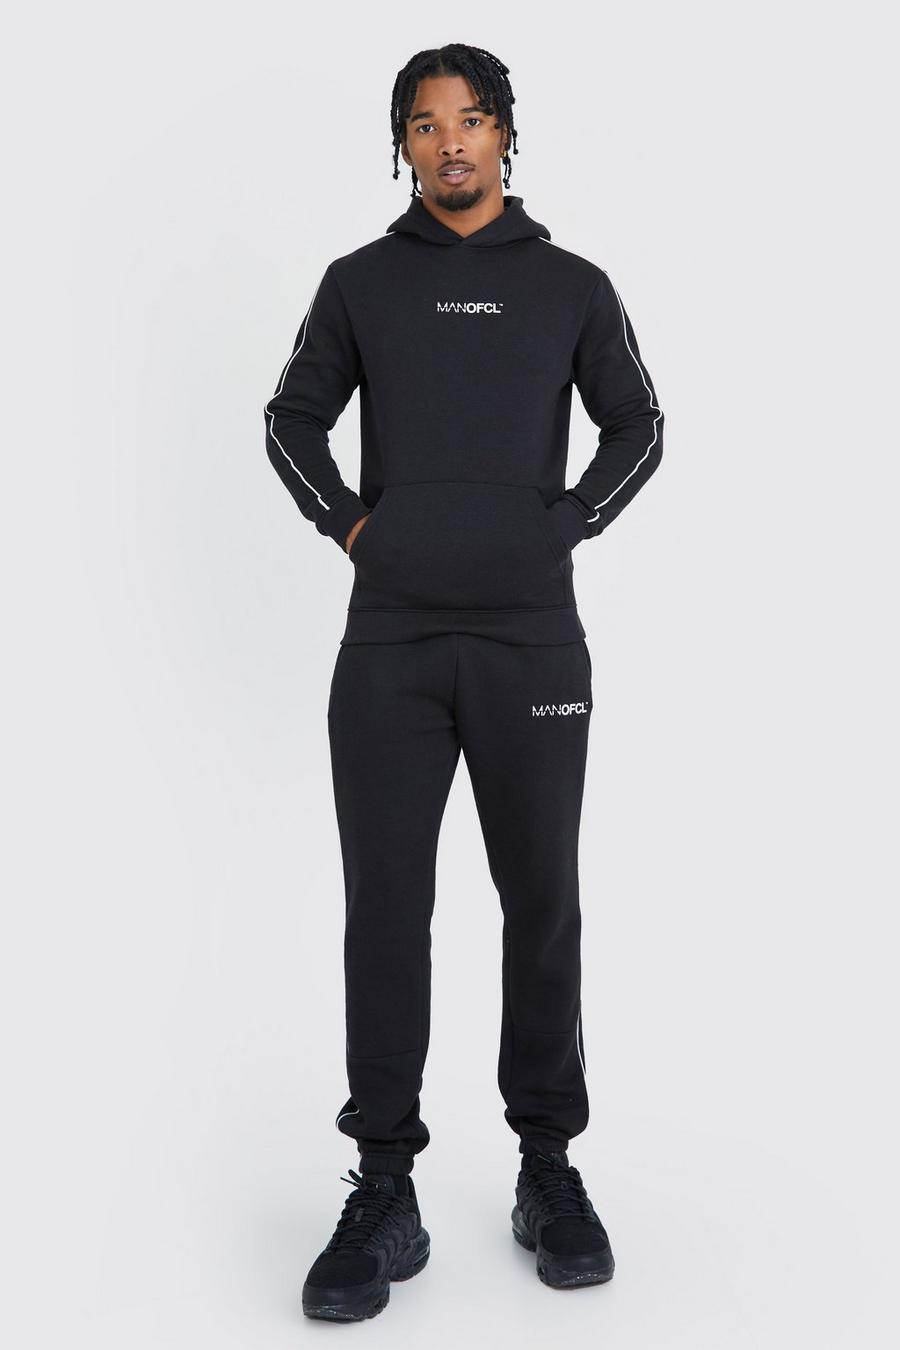 Black Muscle Fit Ofcl Man Hooded Tracksuit